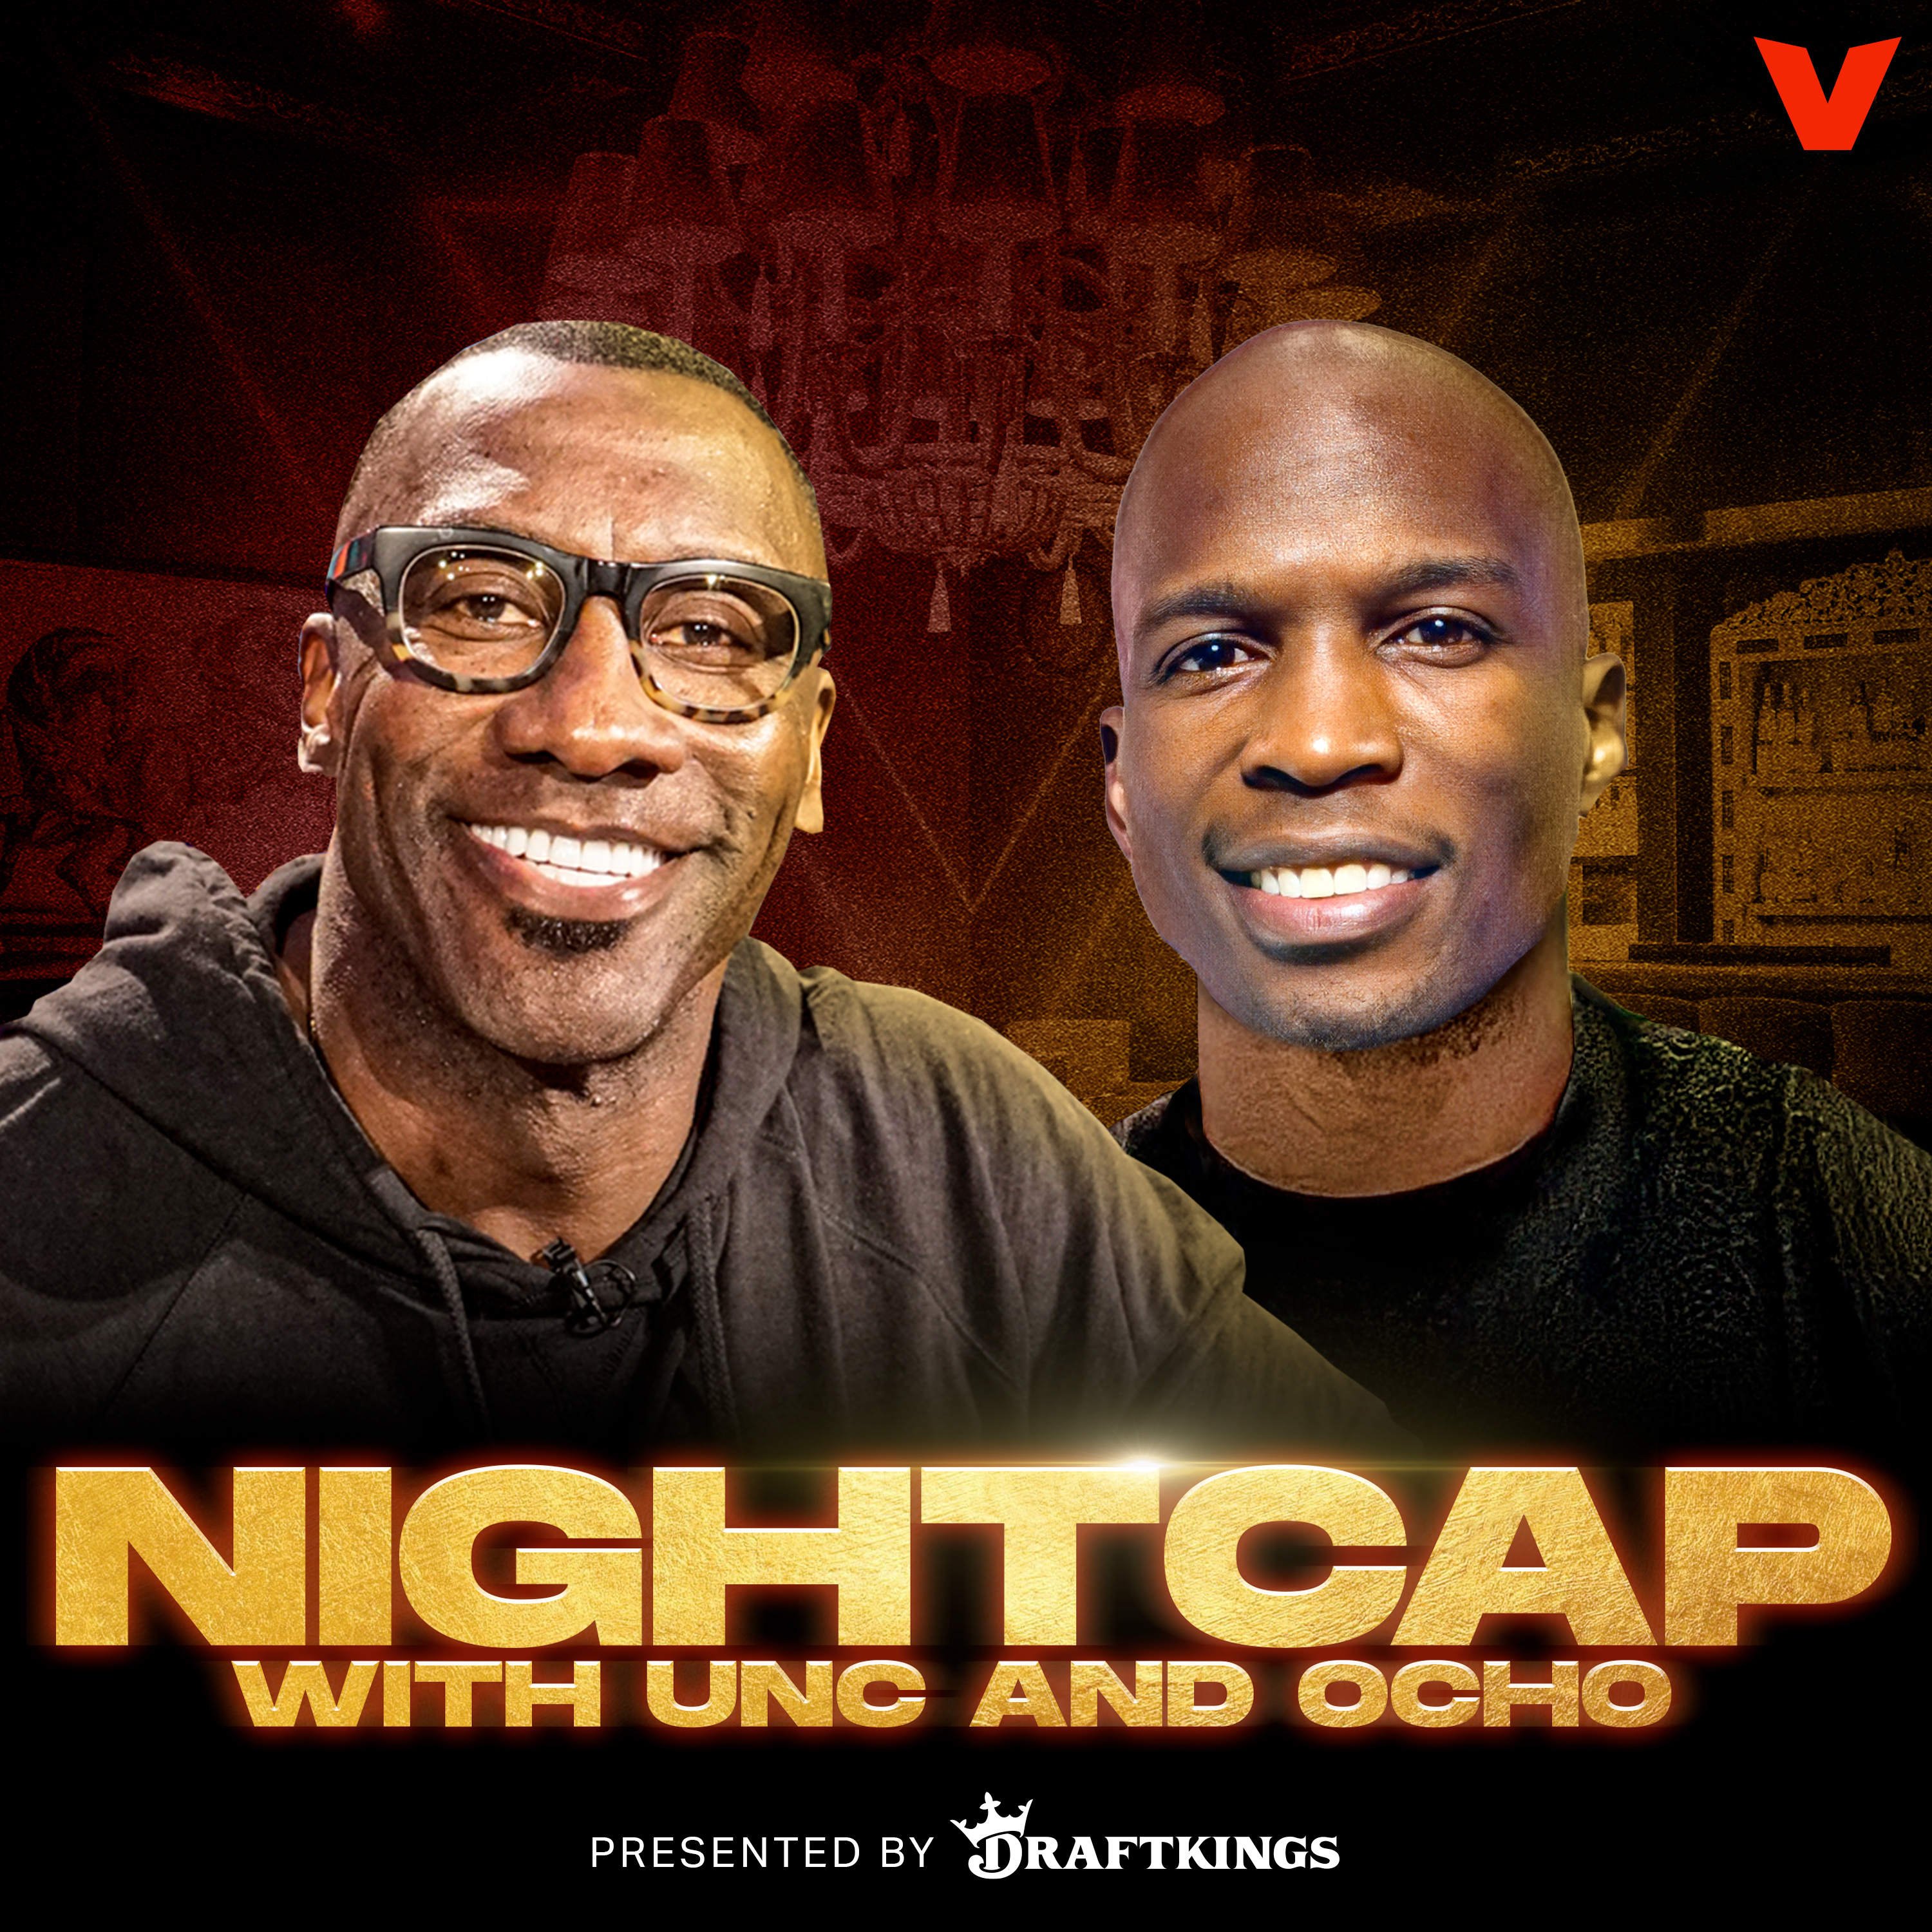 Nightcap - Giants Lose Again, Rodney Harrison's Comments, Shannon Story Time